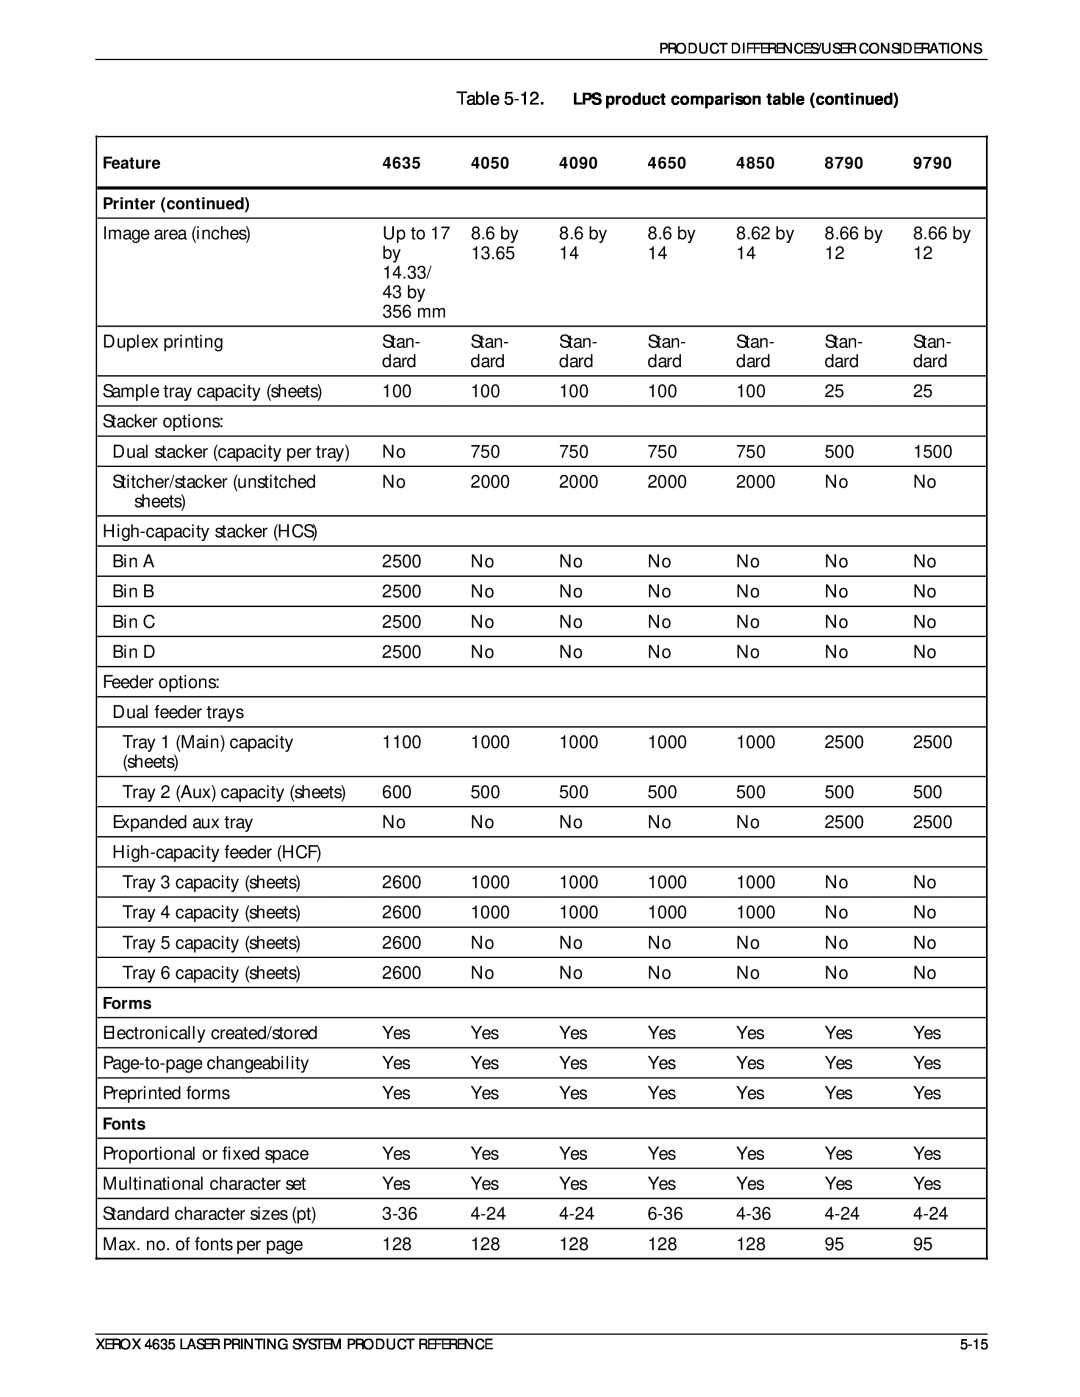 Xerox 721P83071 manual LPS product comparison table continued 